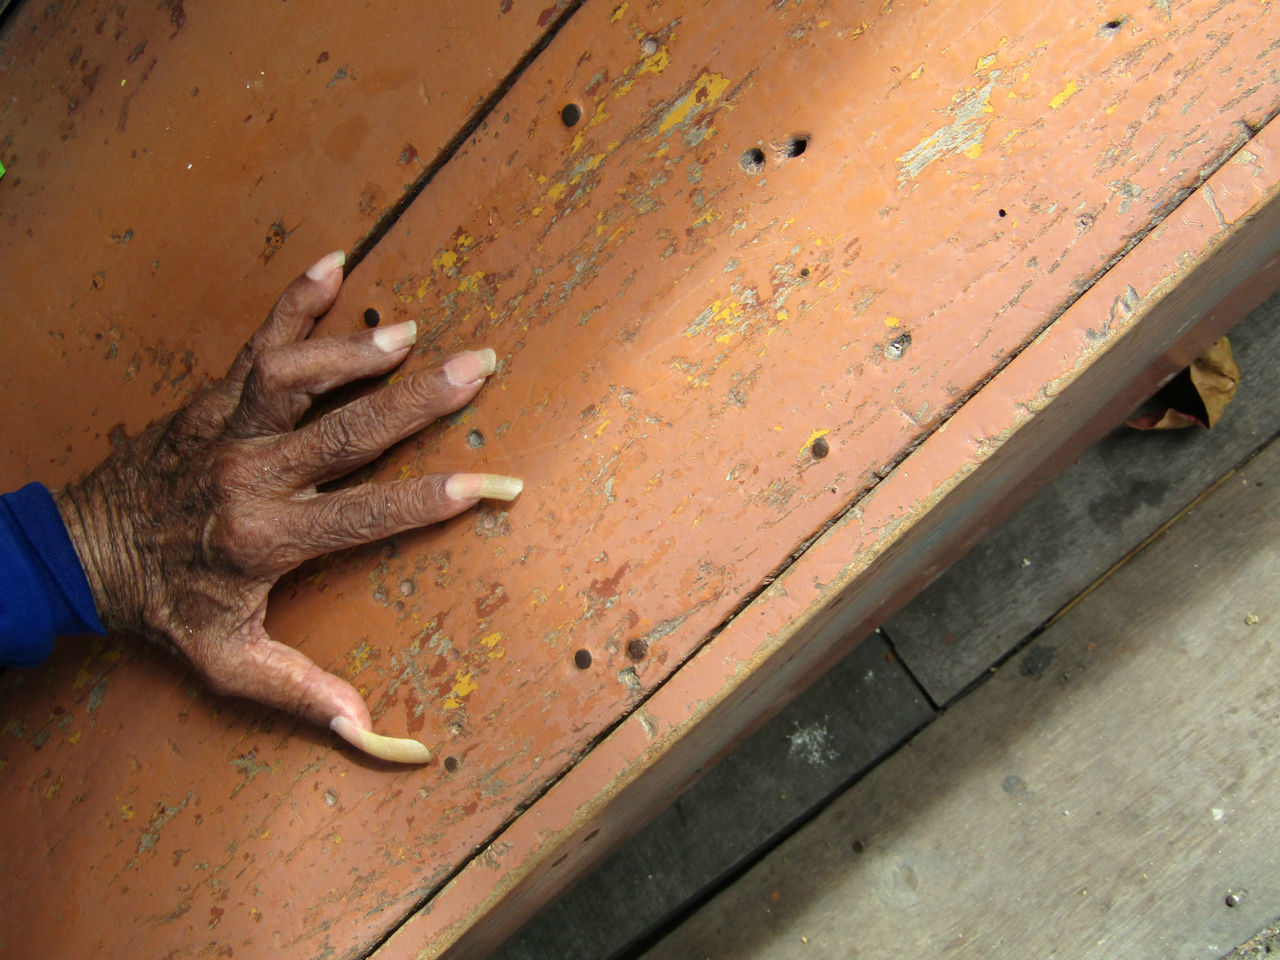 CLOSE-UP OF HUMAN HAND ON WOOD